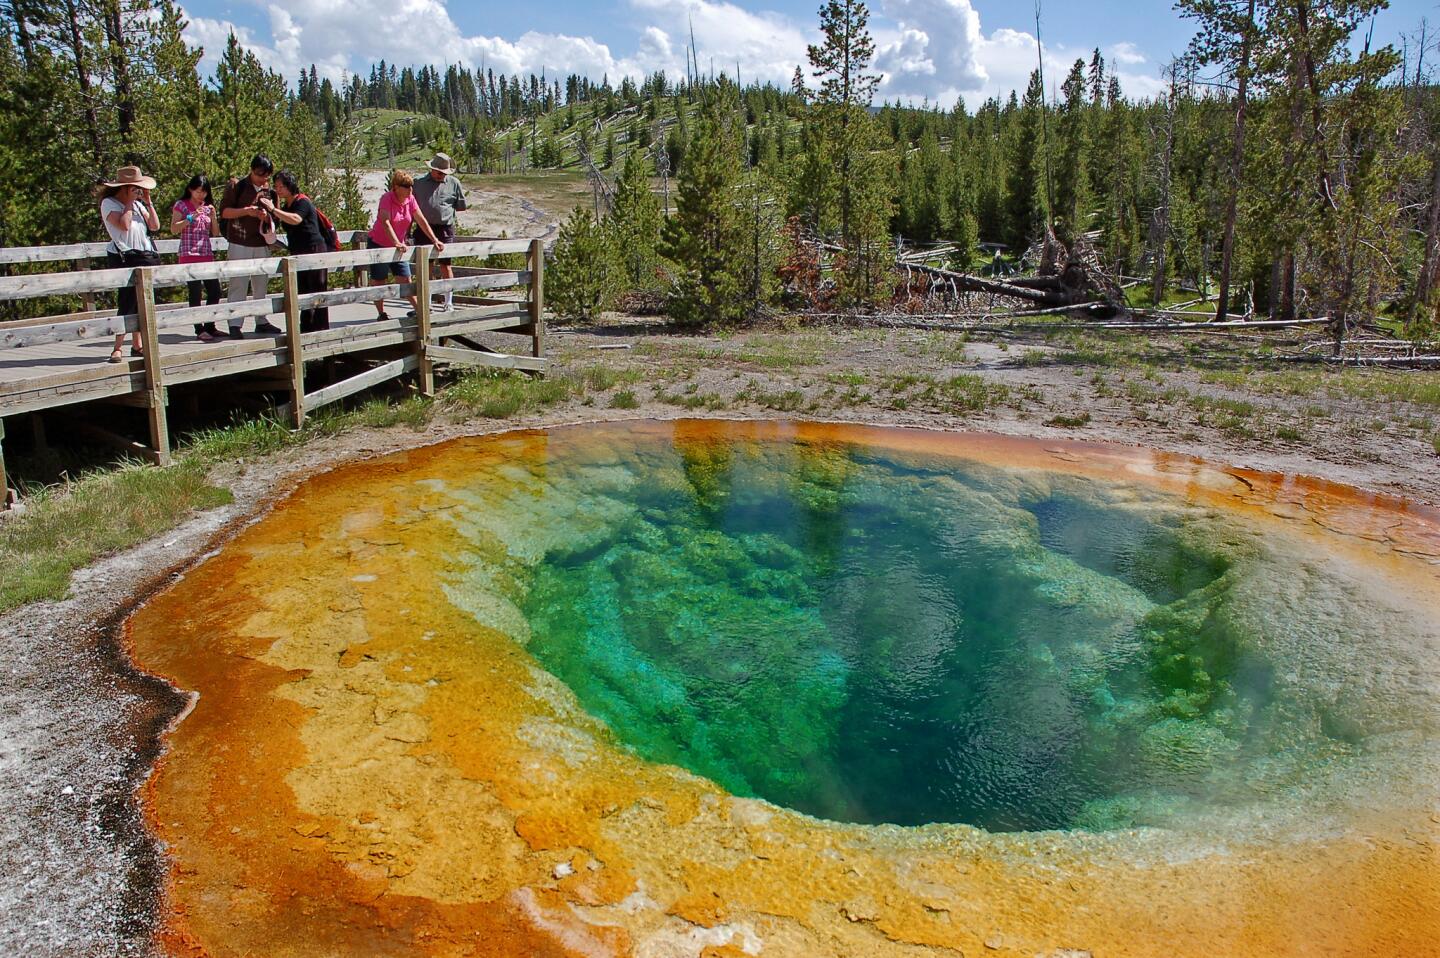 Visitors in 2011: 3,394,326 Established in 1872, Yellowstone is the nation's oldest national park. It's known for its geysers and hot springs. Indeed, Yellowstone contains 60% of the world's geysers, including Old Faithful, its most famous, and the Grand Prismatic Hot Spring, America's largest hot spring. The park also houses a rich collection of historical artifacts in its museum, library and research centers. More info: http://www.nps.gov/yell/index.htm